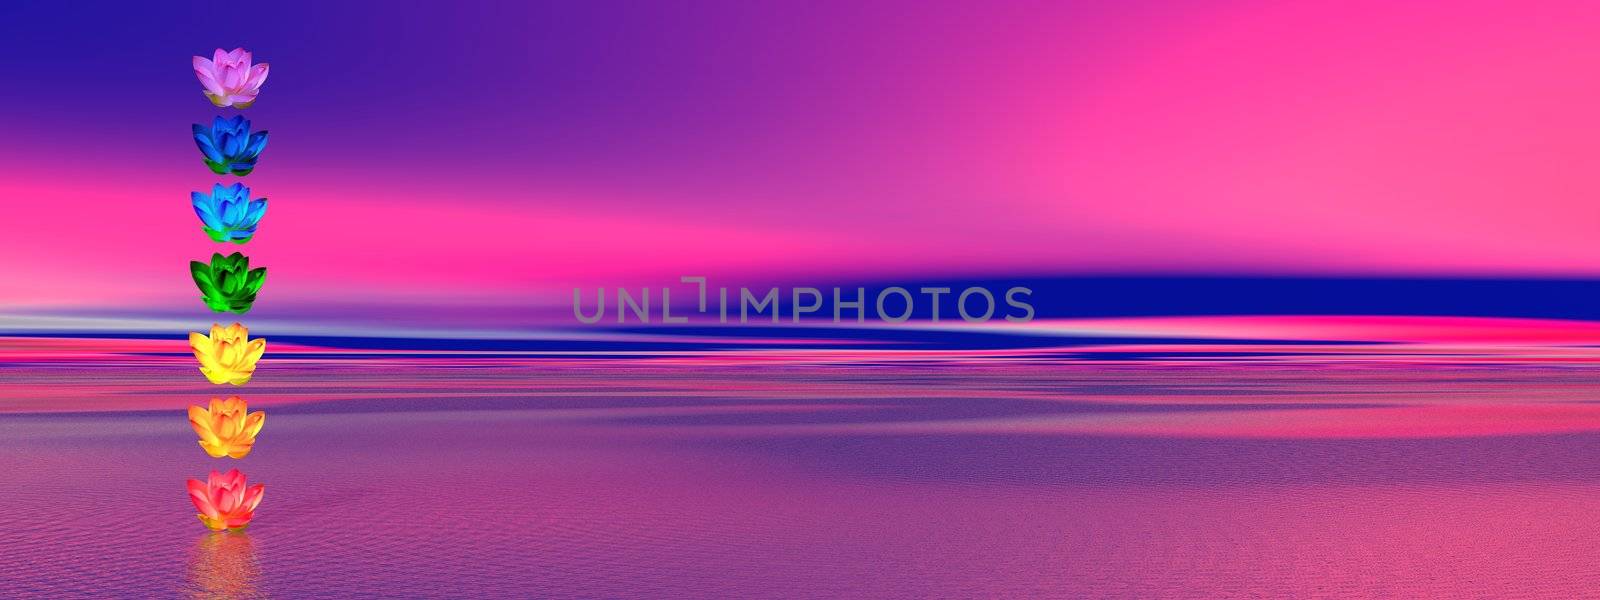 Chakra colors of lily flower in a column upon ocean in pink and blue background